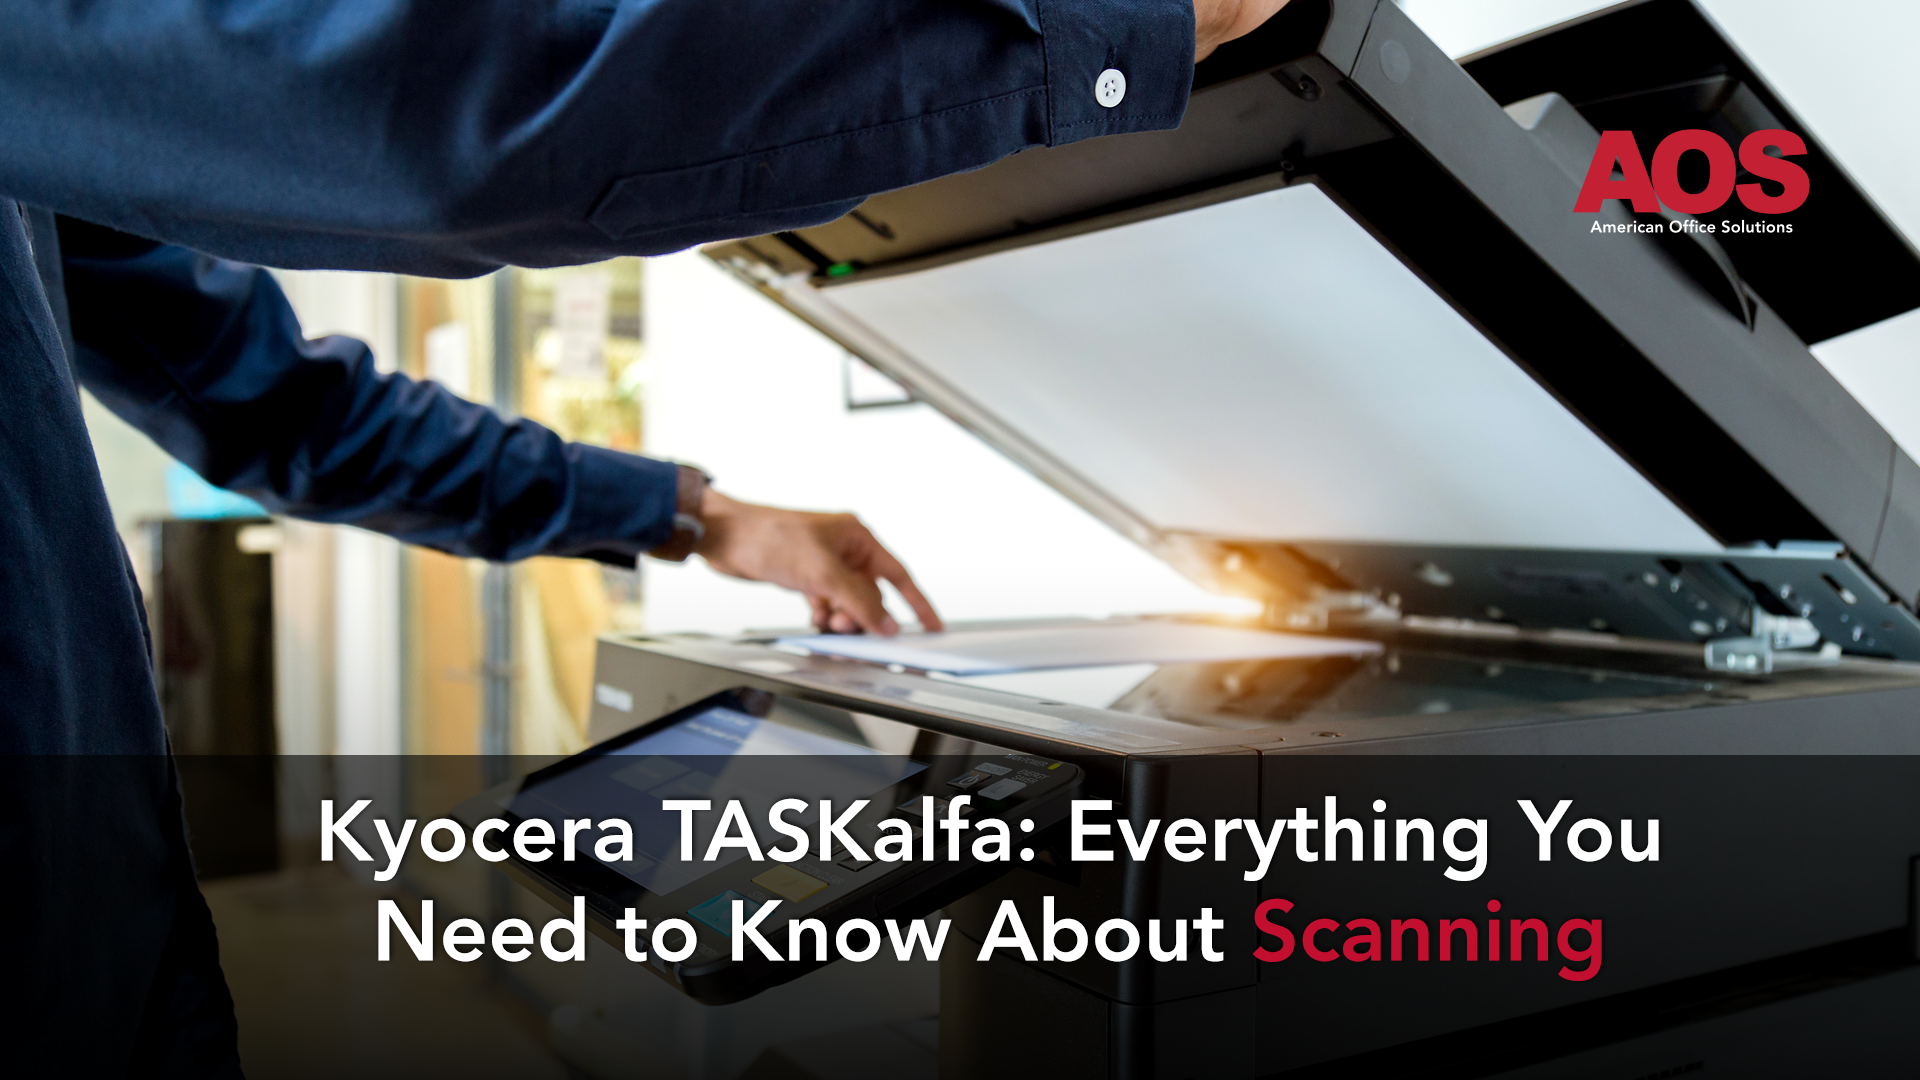 Kyocera TASKalfa: Everything You Need to Know About Scanning